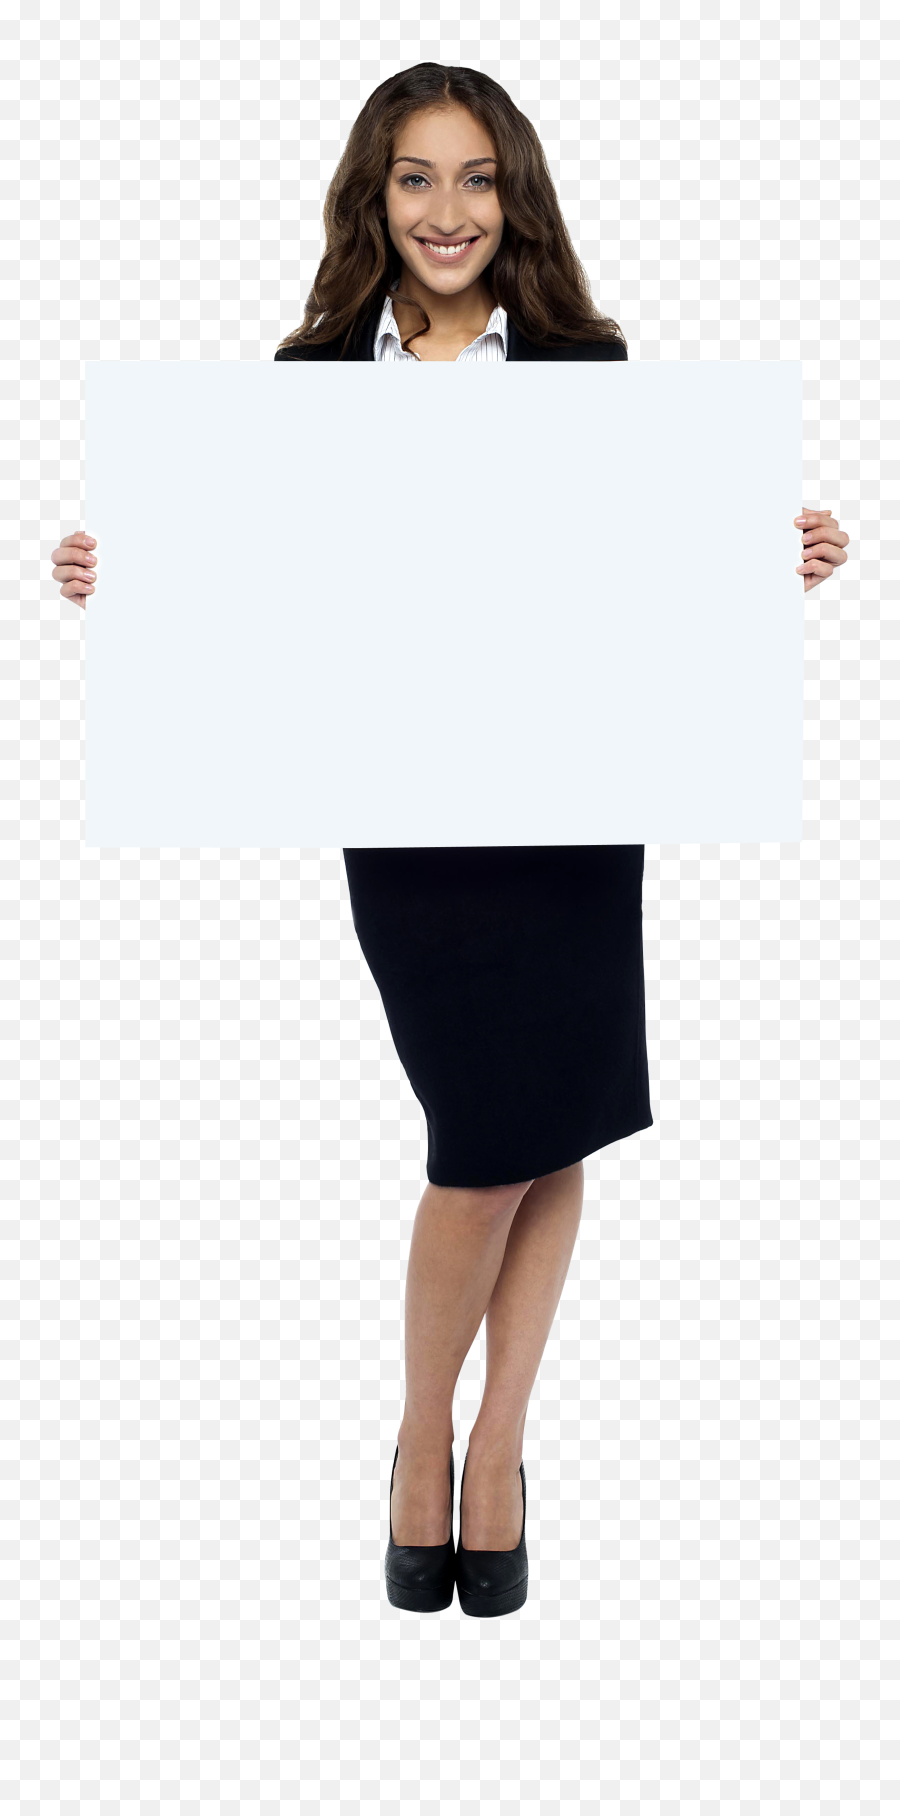 Girl Holding Banner Png Images Transparent Background Png Play - Stock Image Png Girl Emoji,Banners Png